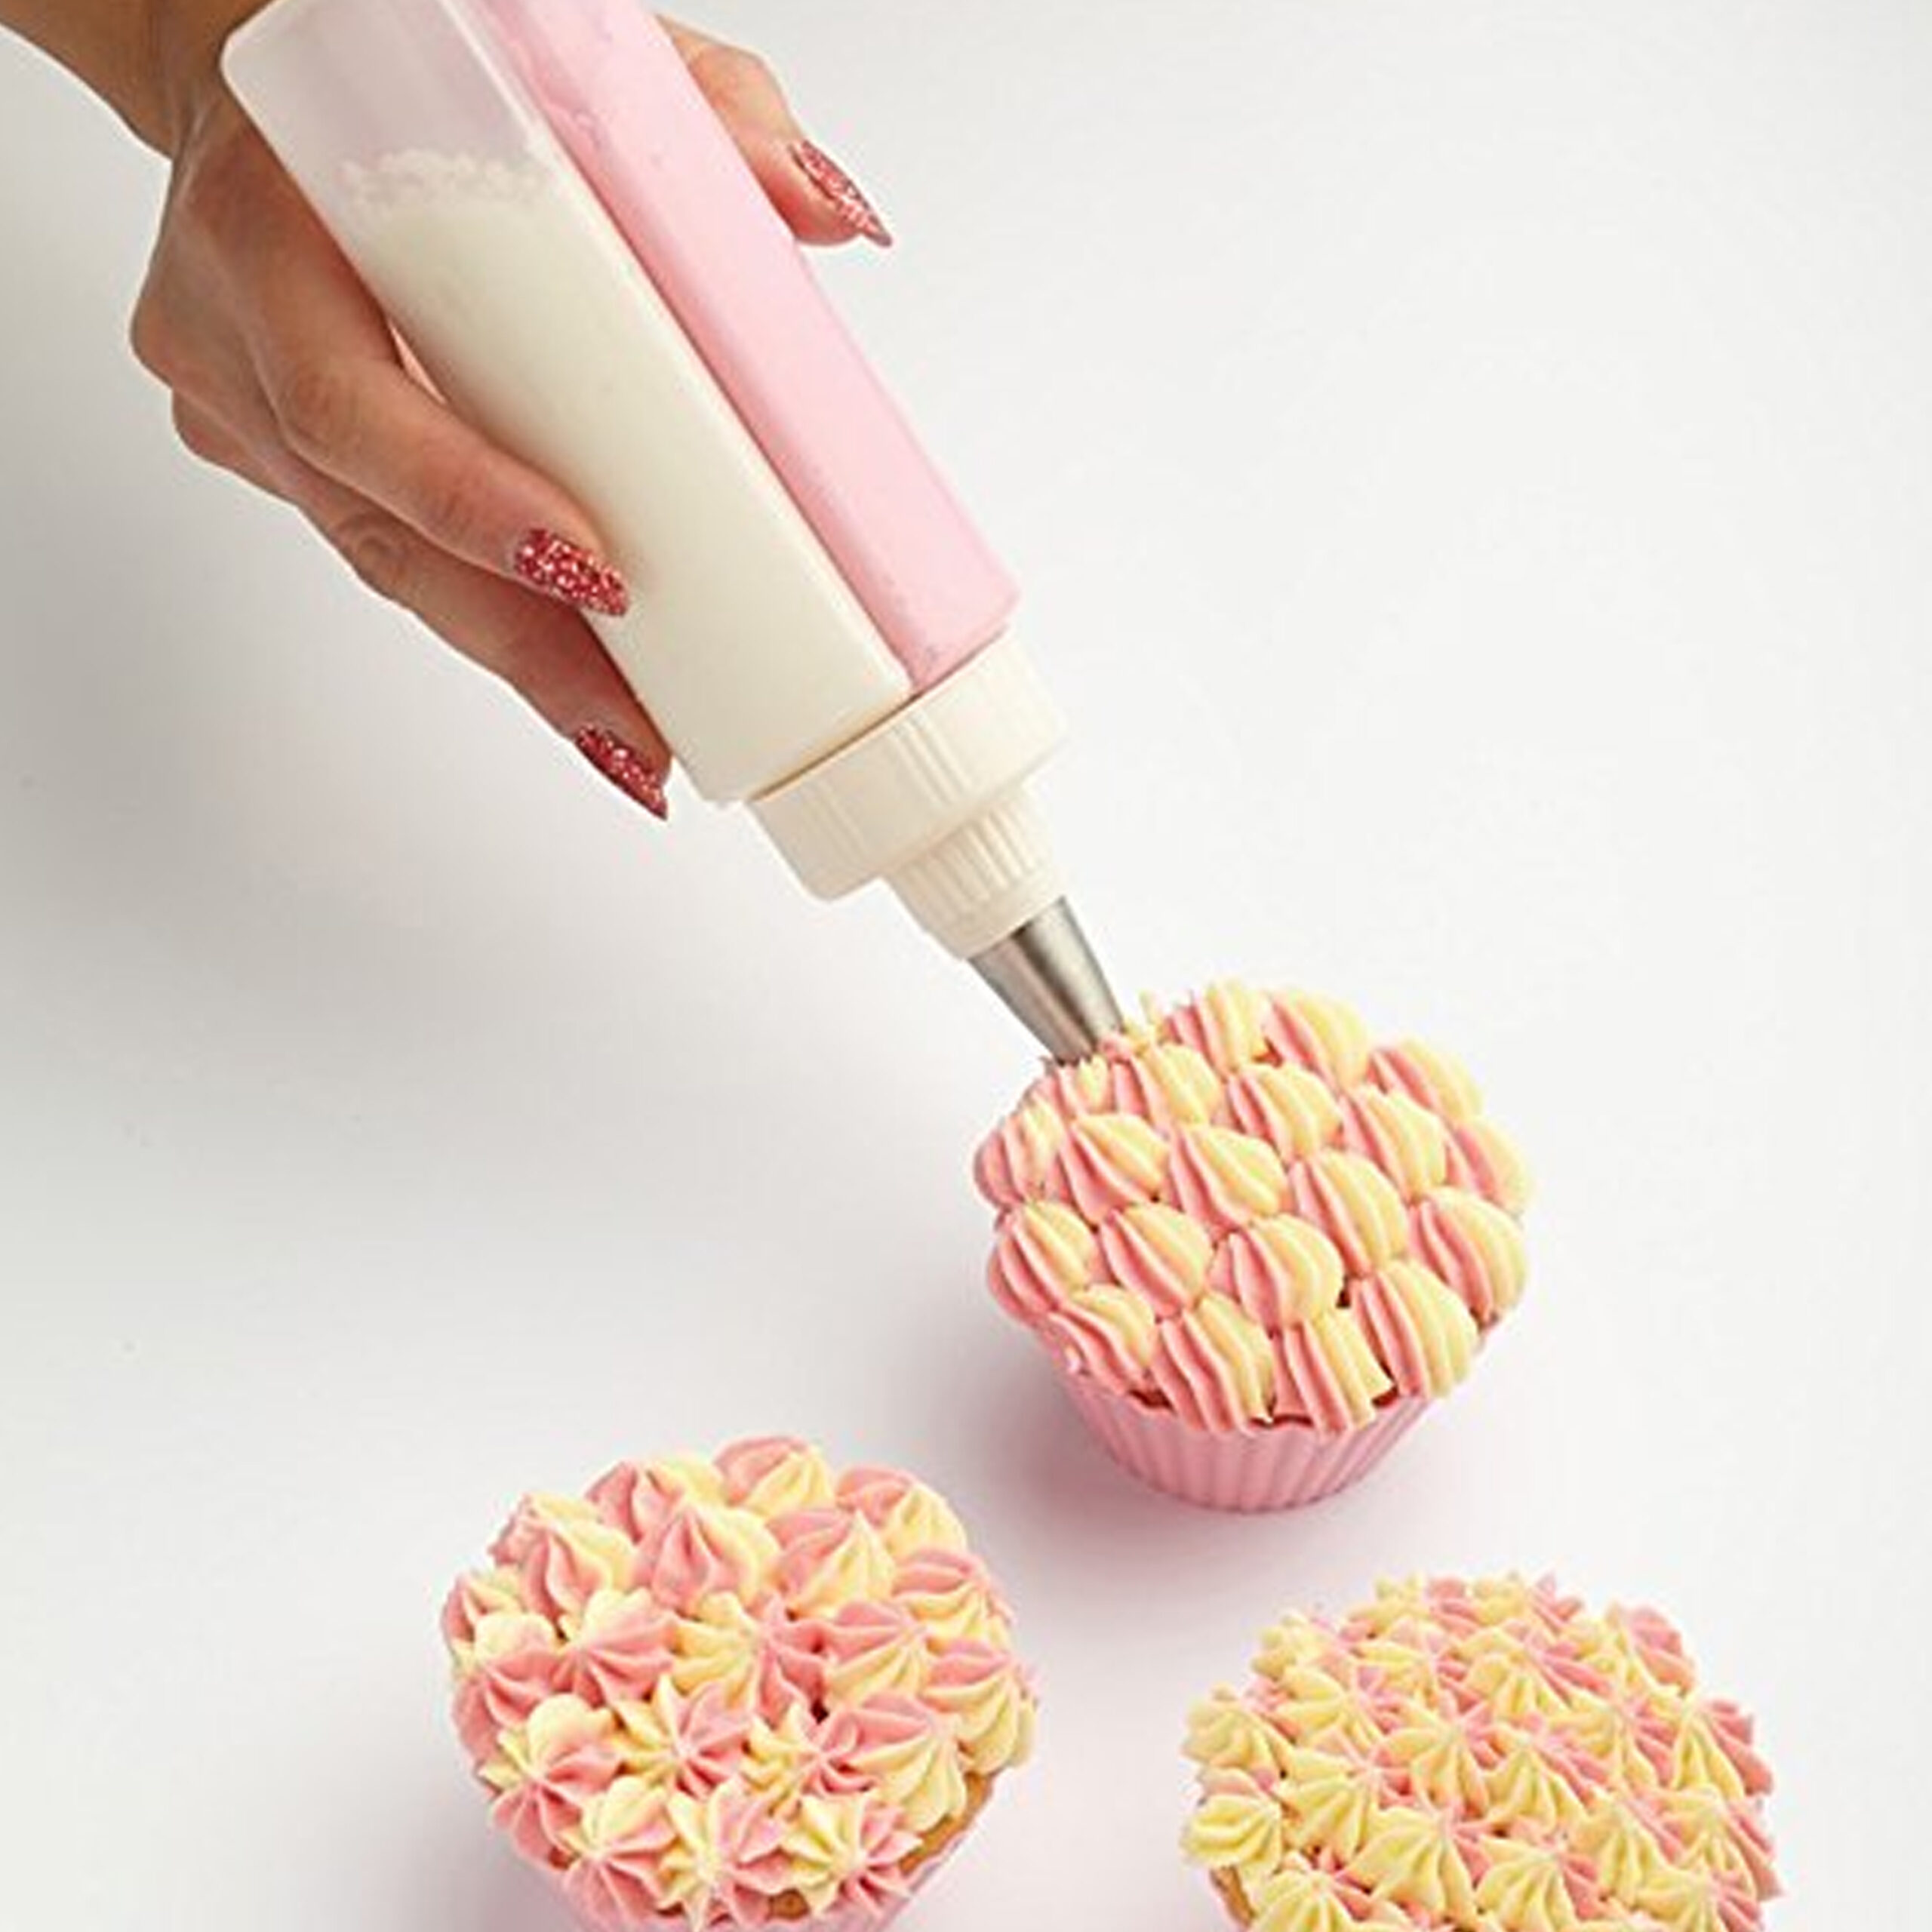 DECORATING
BOTTLE DUAL
ACTION WITH
NOZZLE 100ml